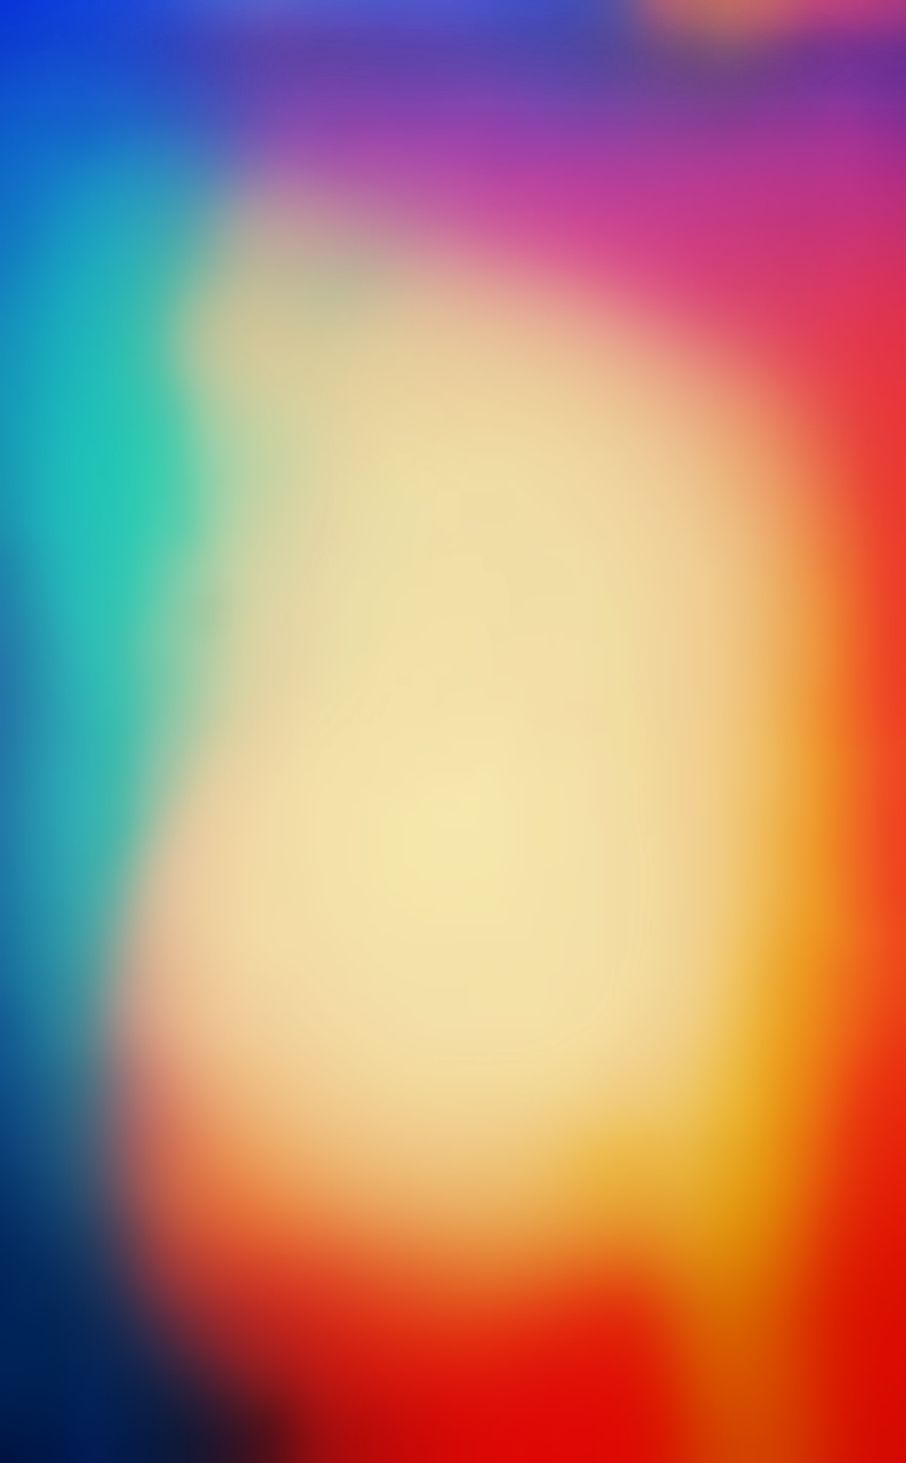 Colorfully Abstract Parallax Wallpaper Sized for the iPhone